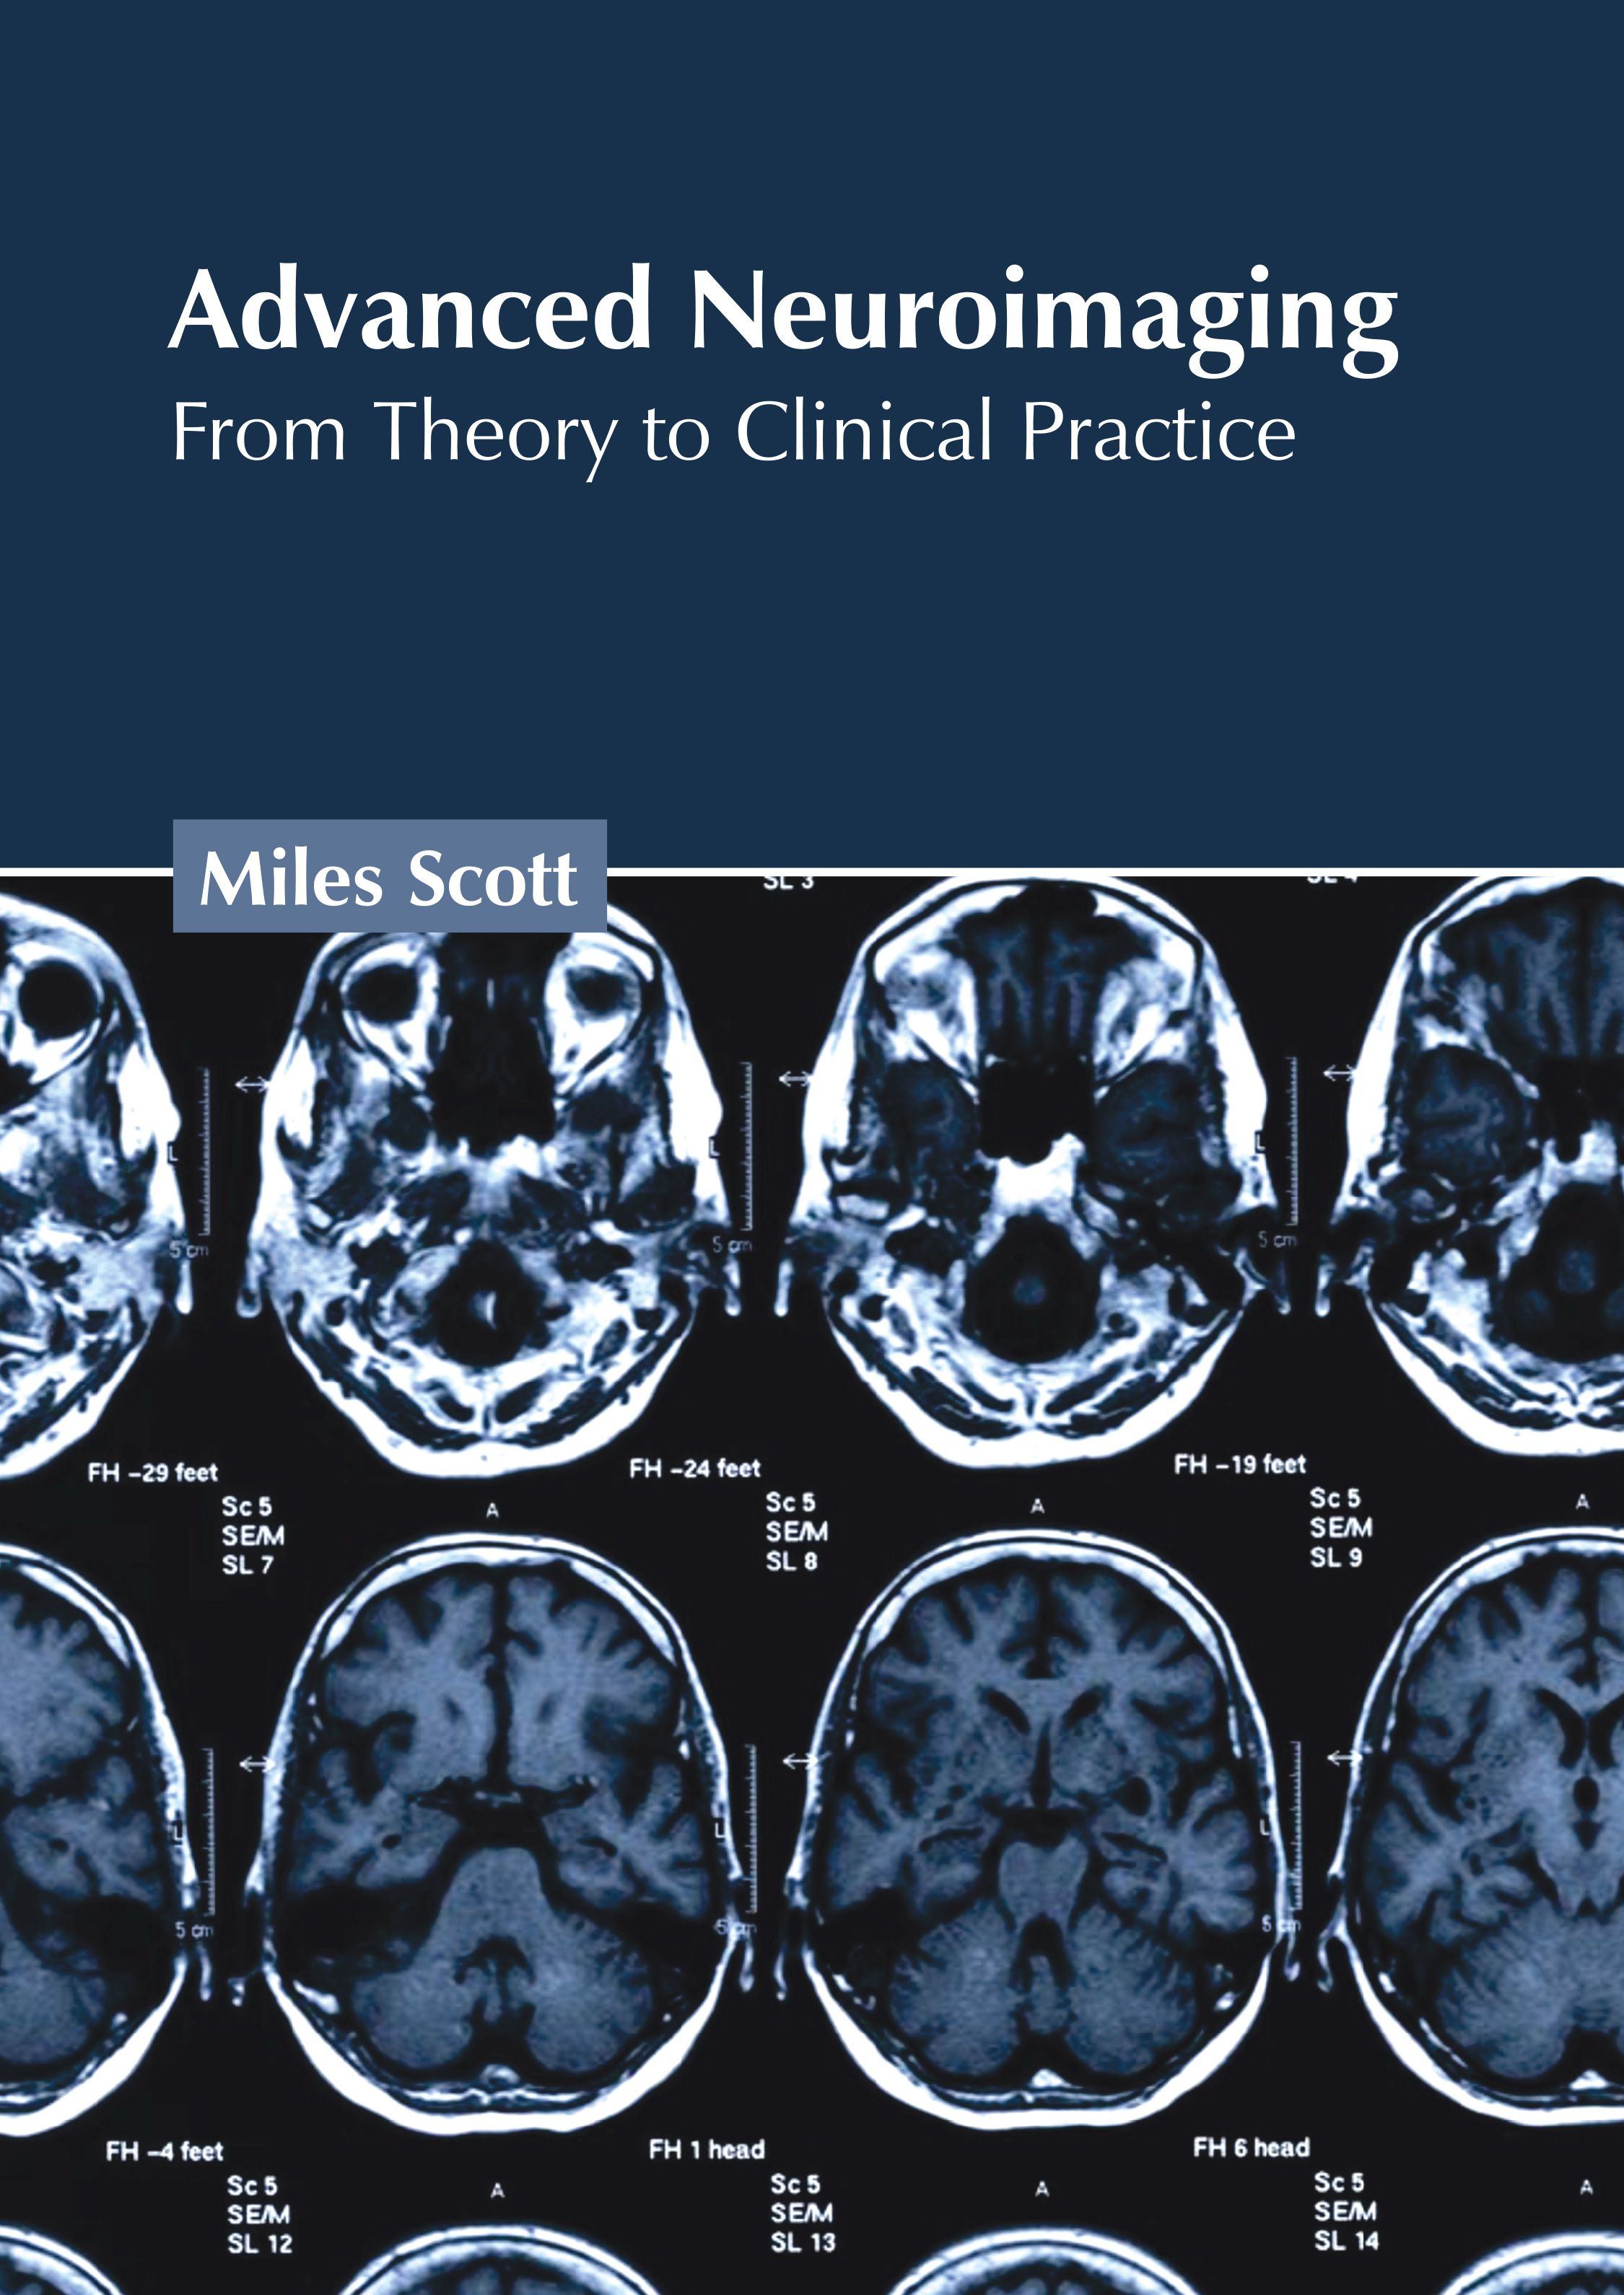 ADVANCED NEUROIMAGING: FROM THEORY TO CLINICAL PRACTICE